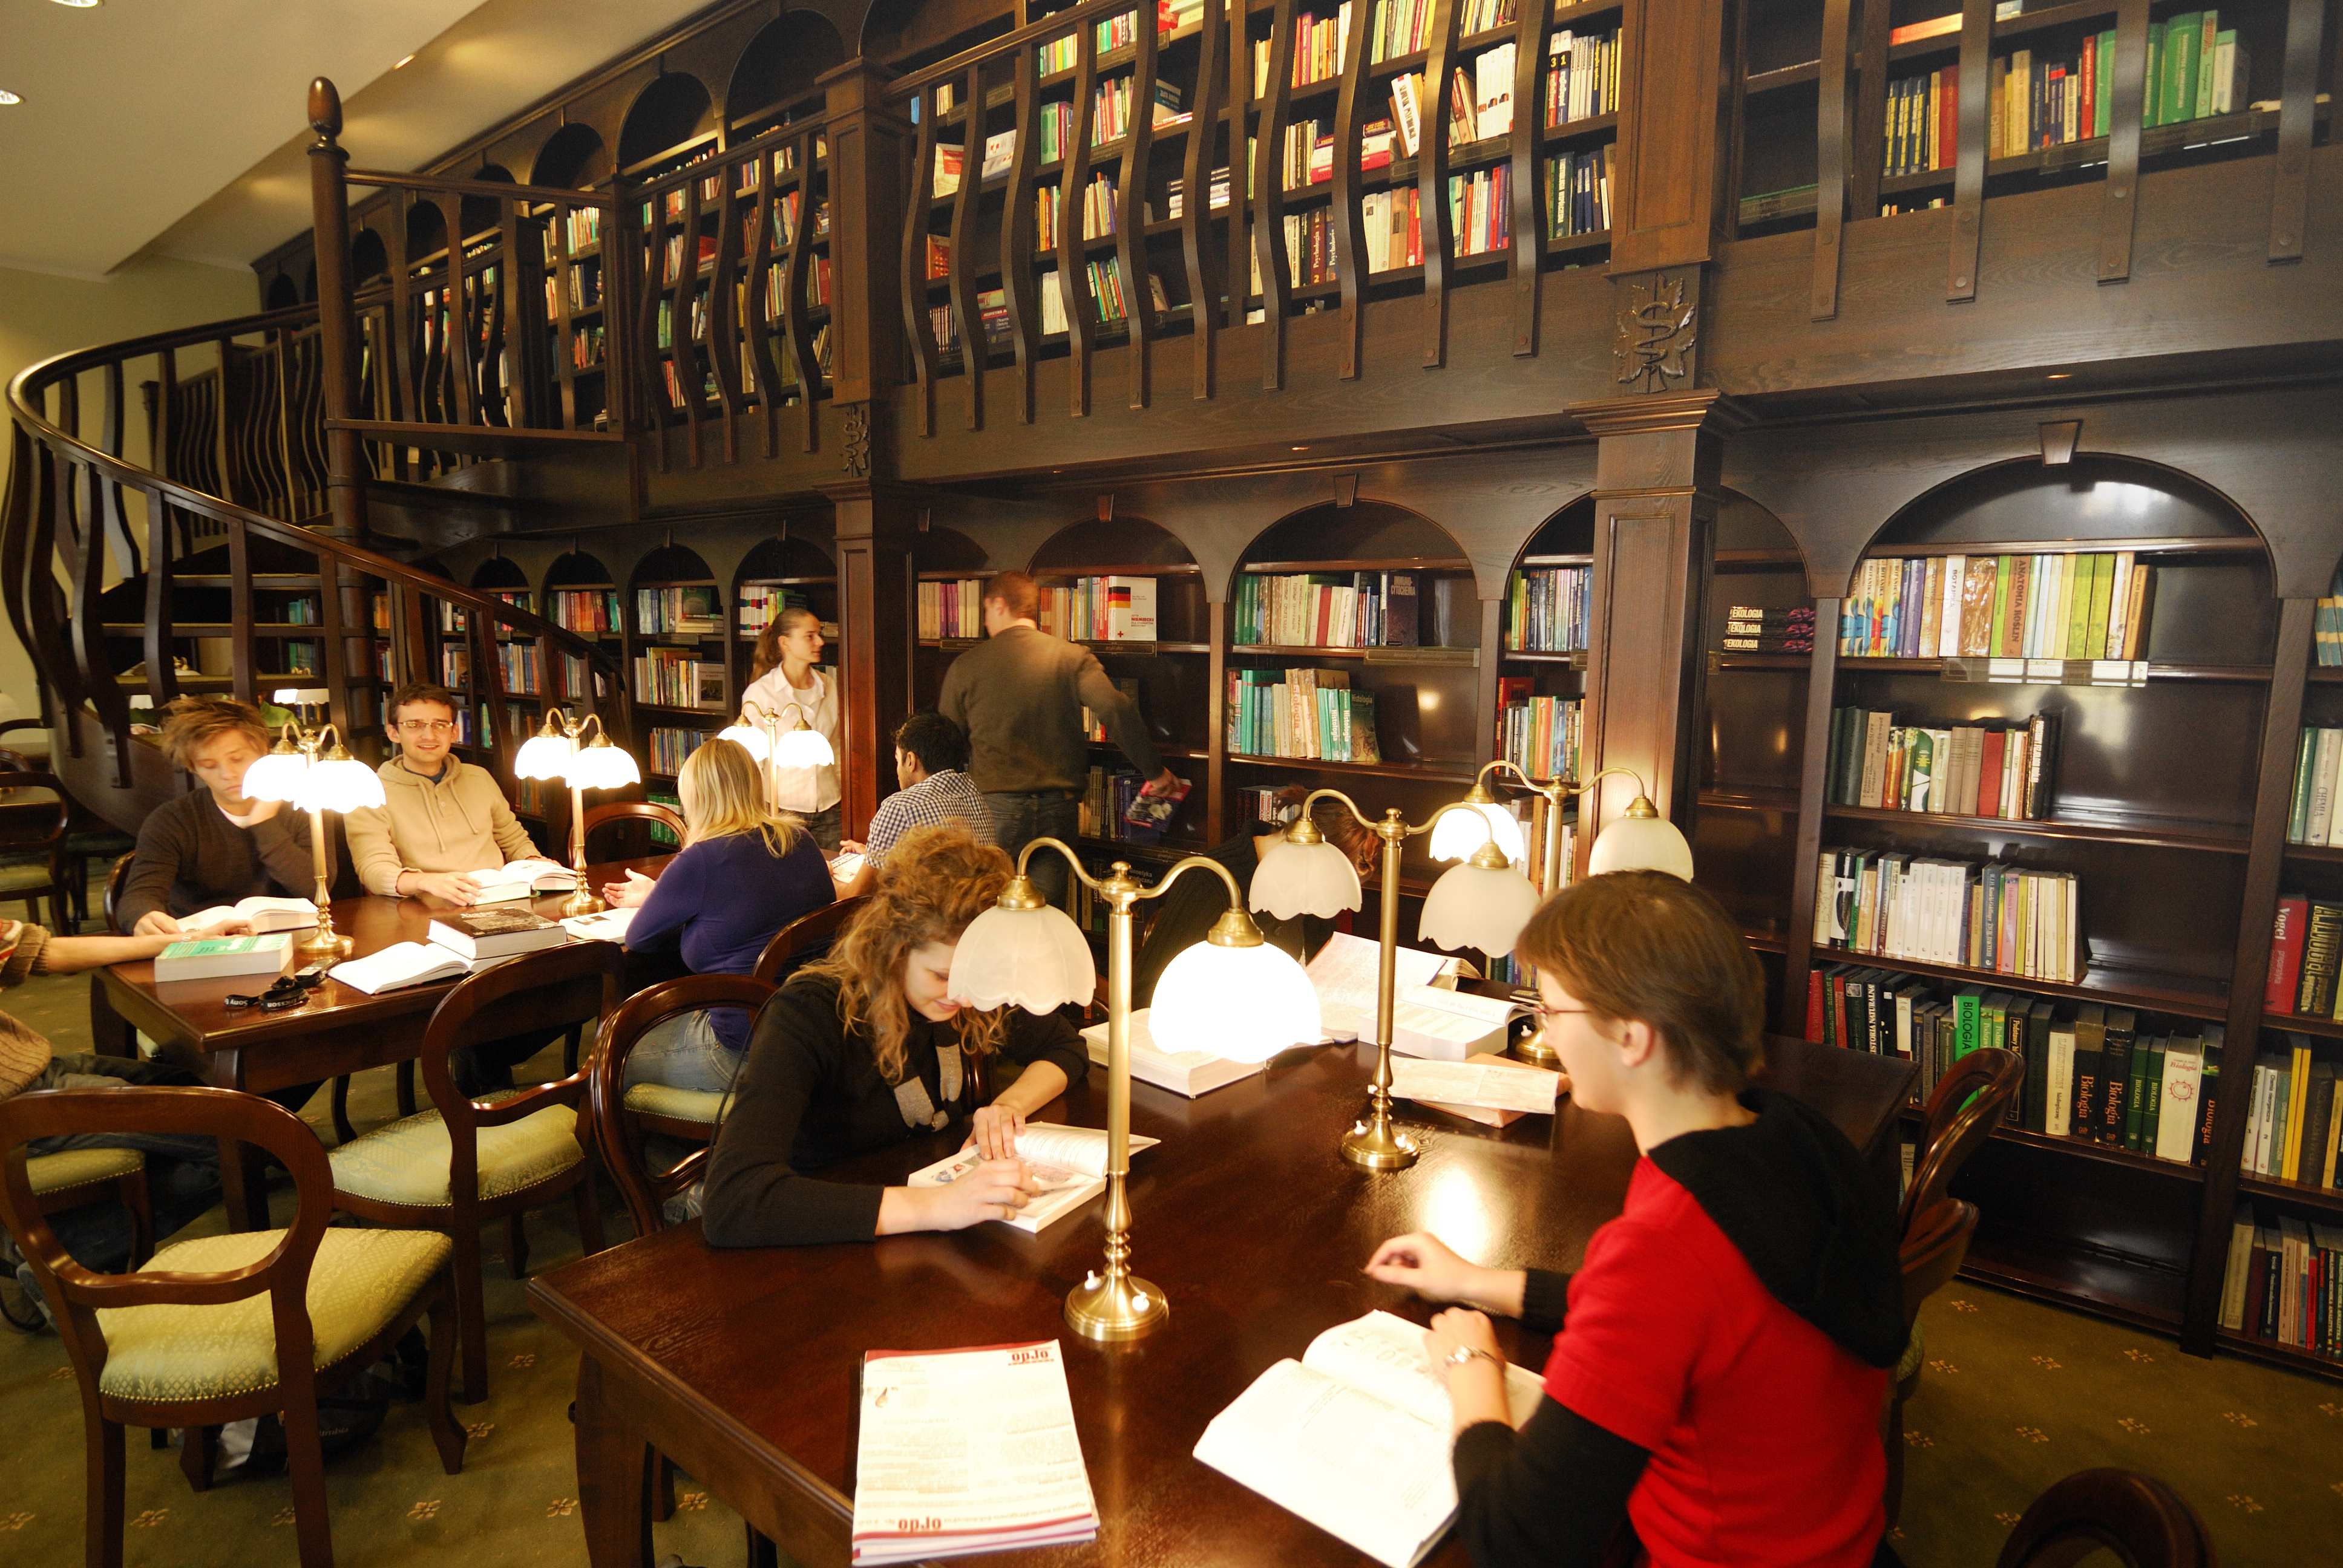 MUB students with MUB Rector in teh Library.